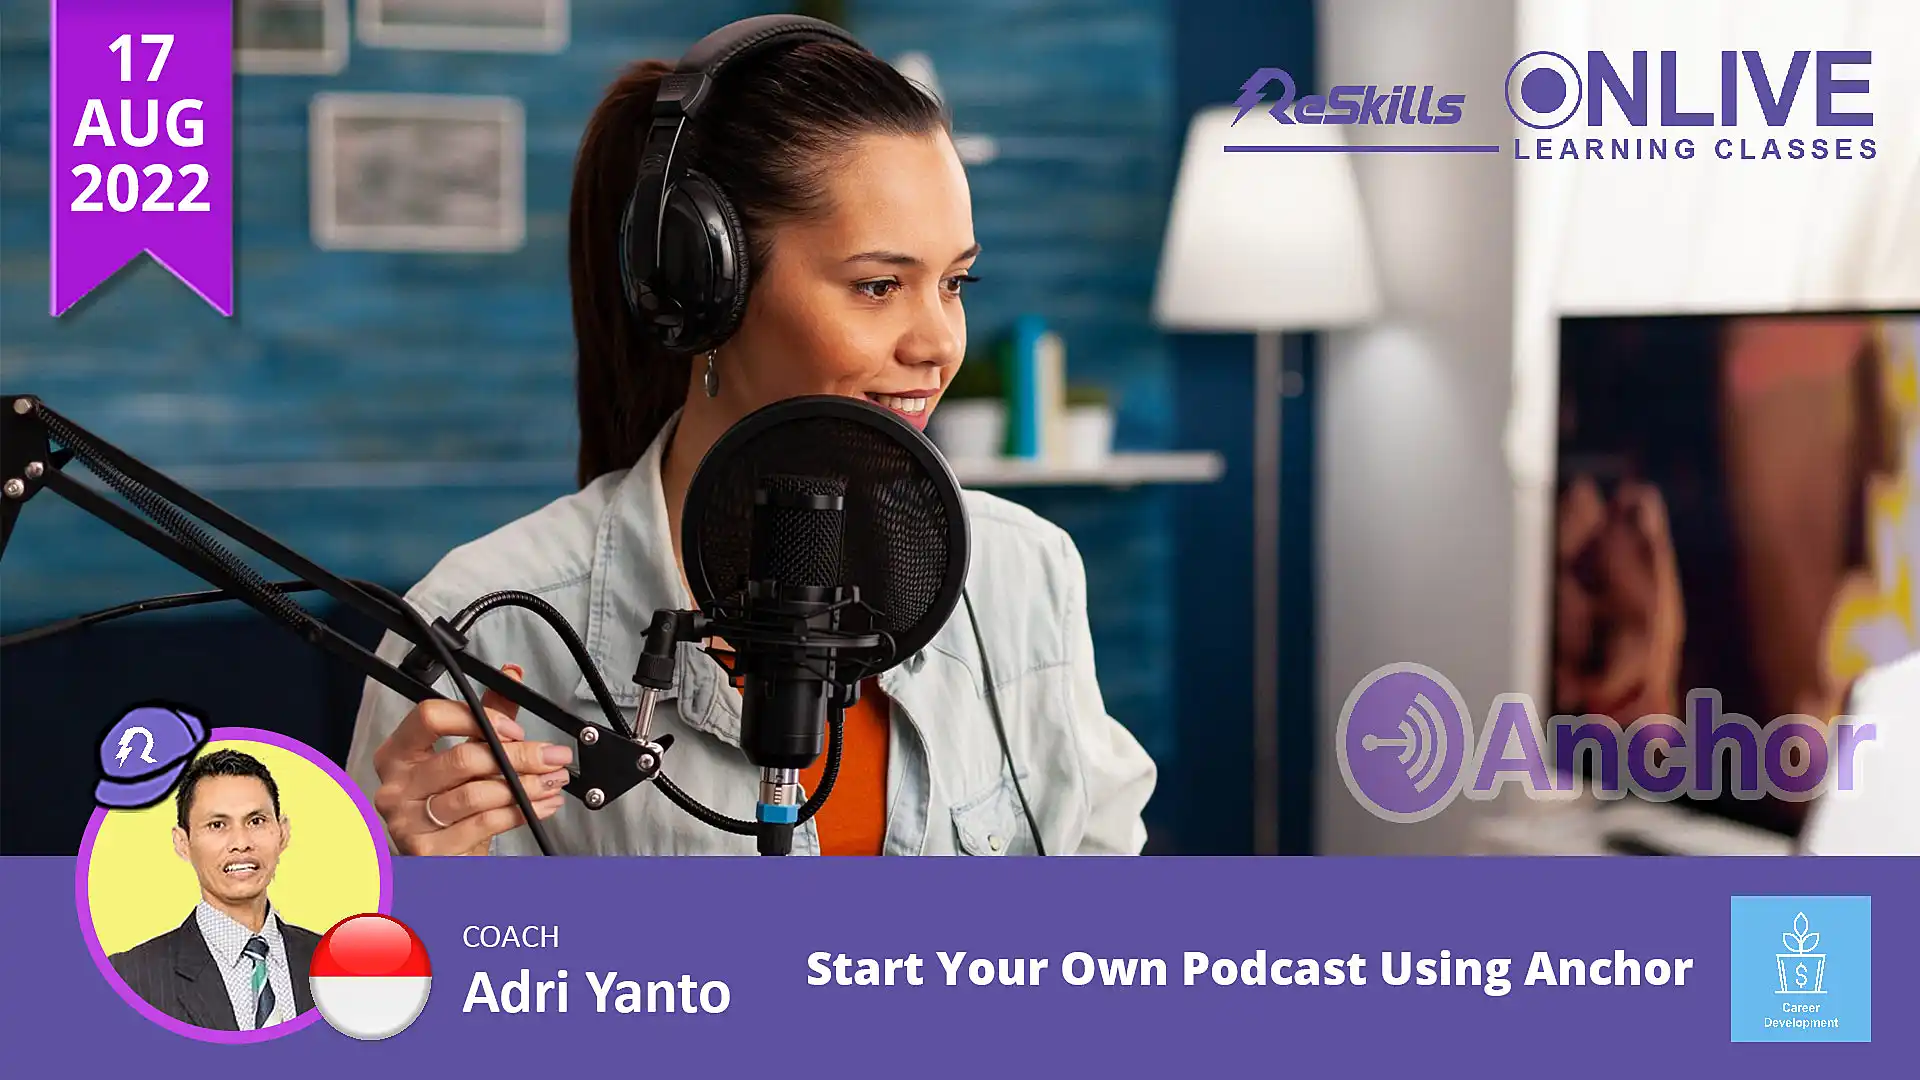 Start Your Own Podcast Using Anchor - ReSkills